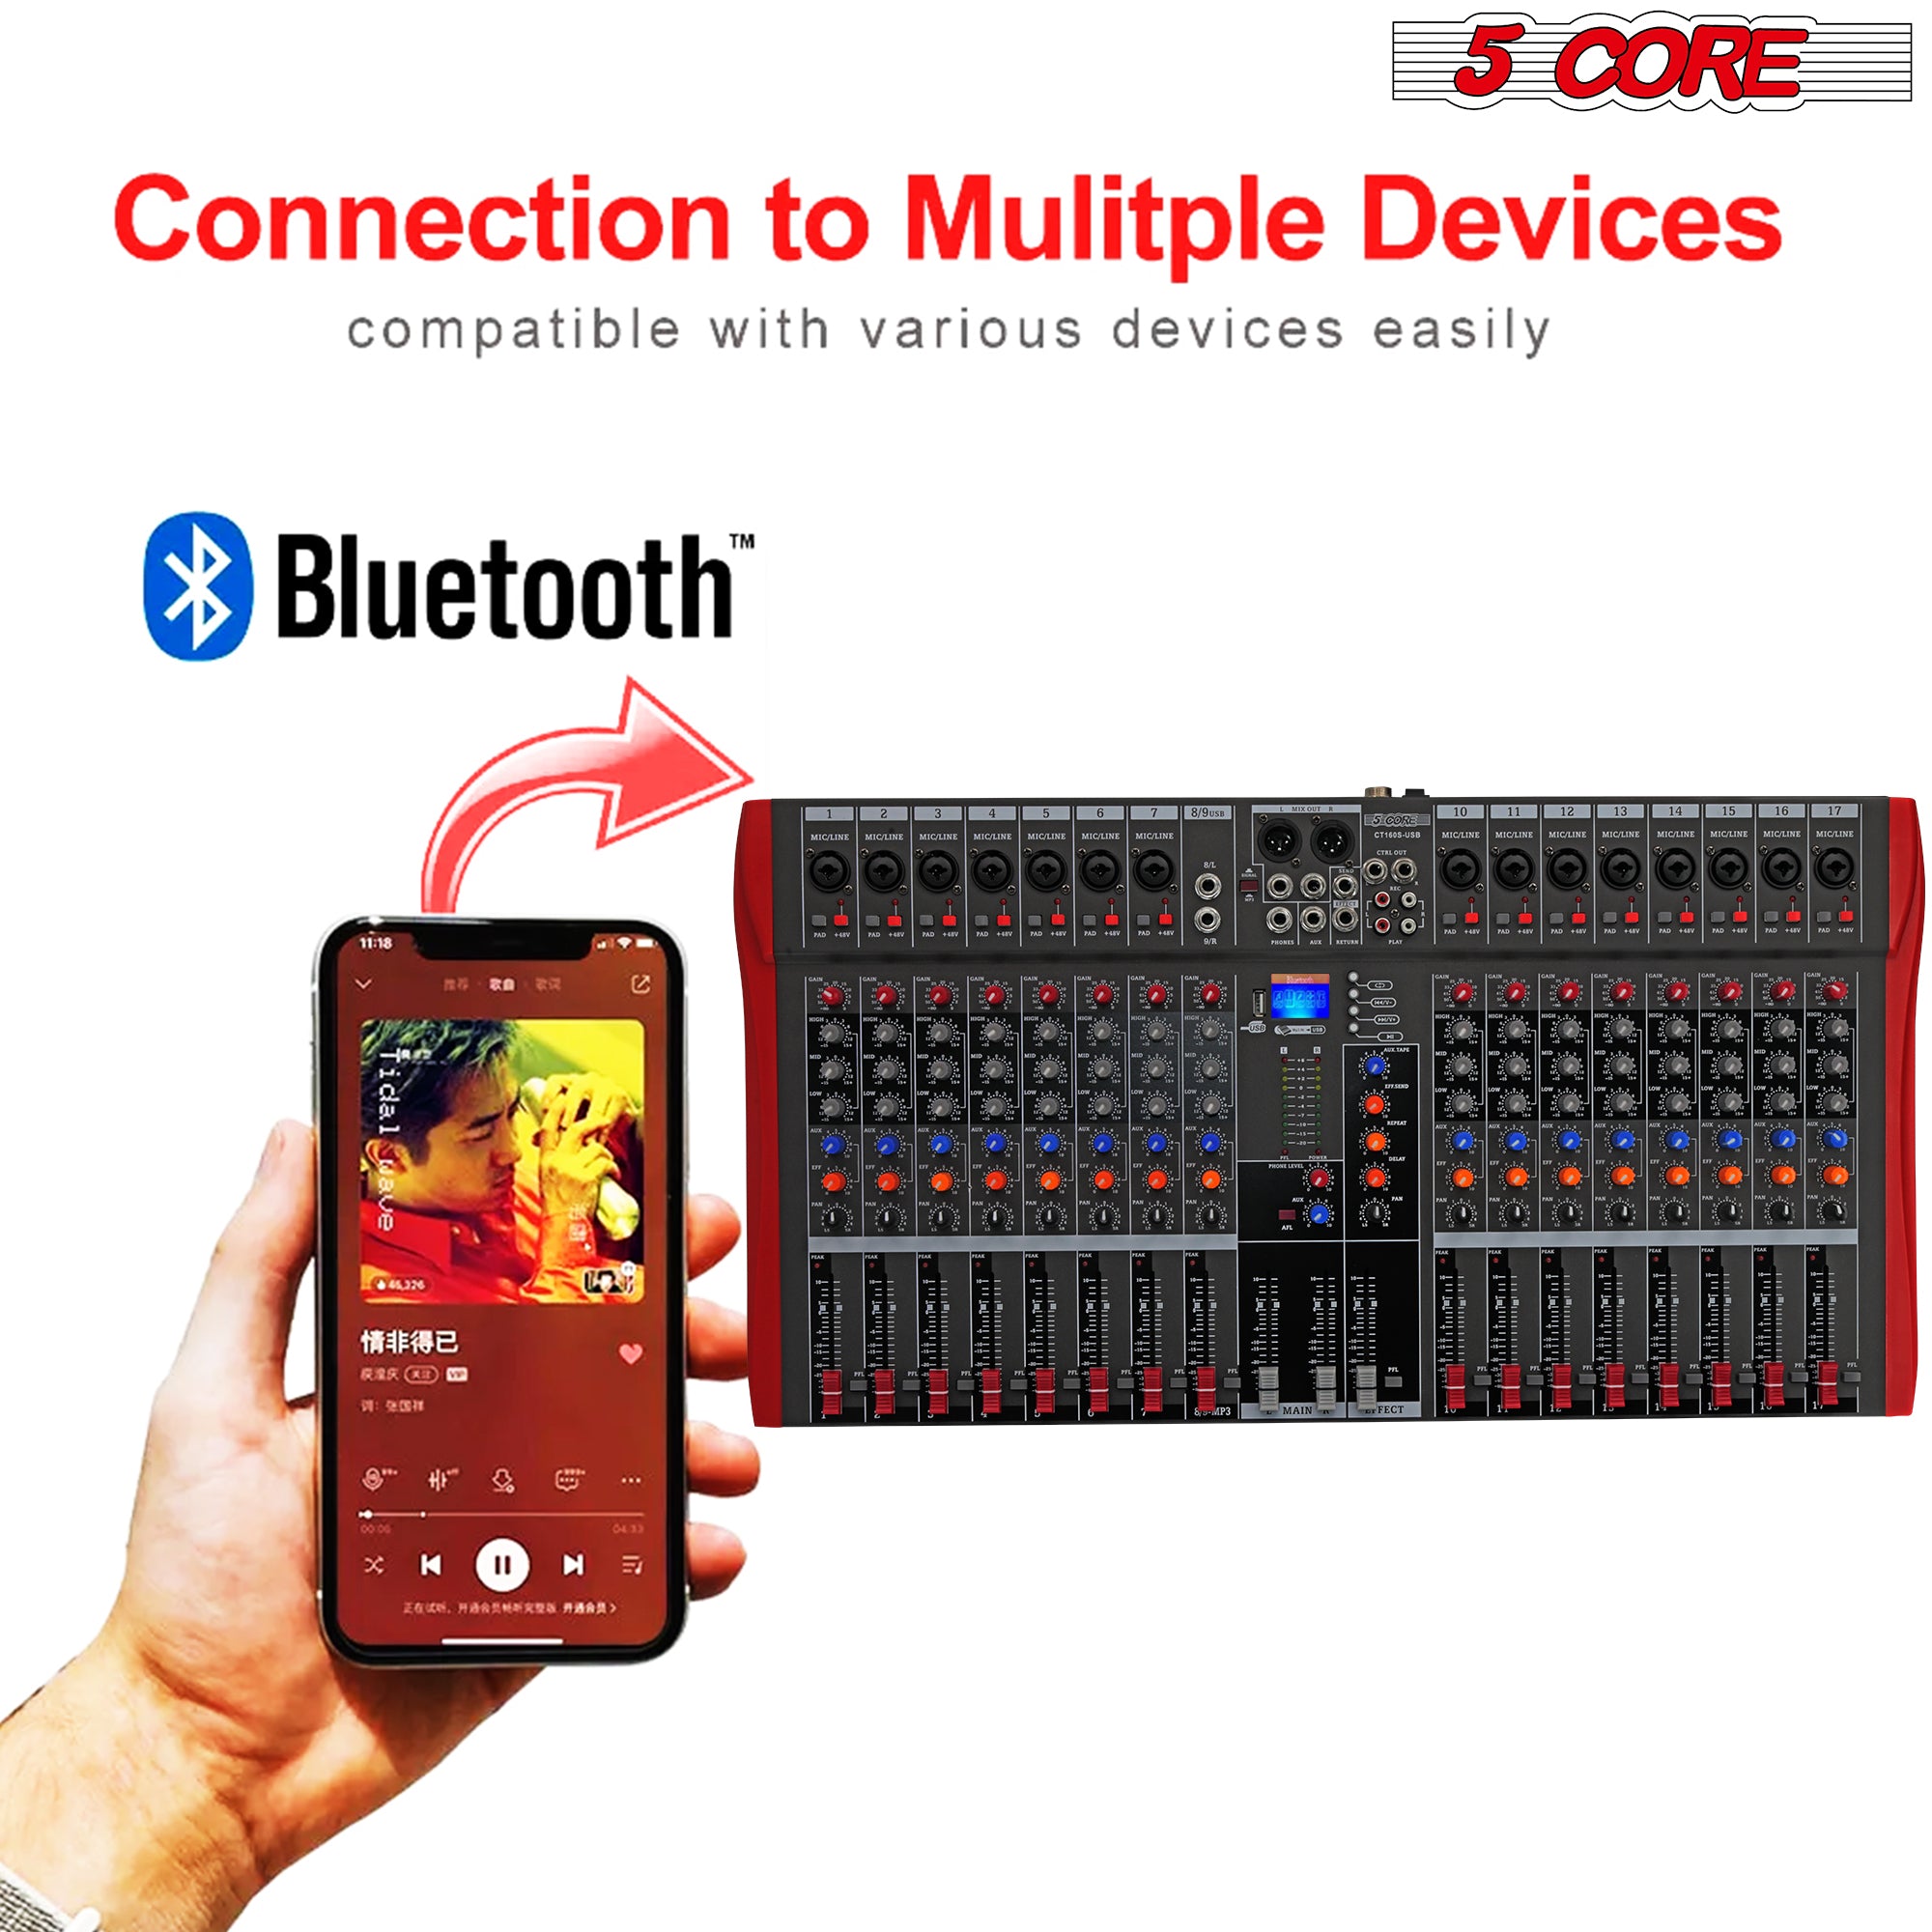 Connection to Multiple Devices. Compatible with various devices easily.